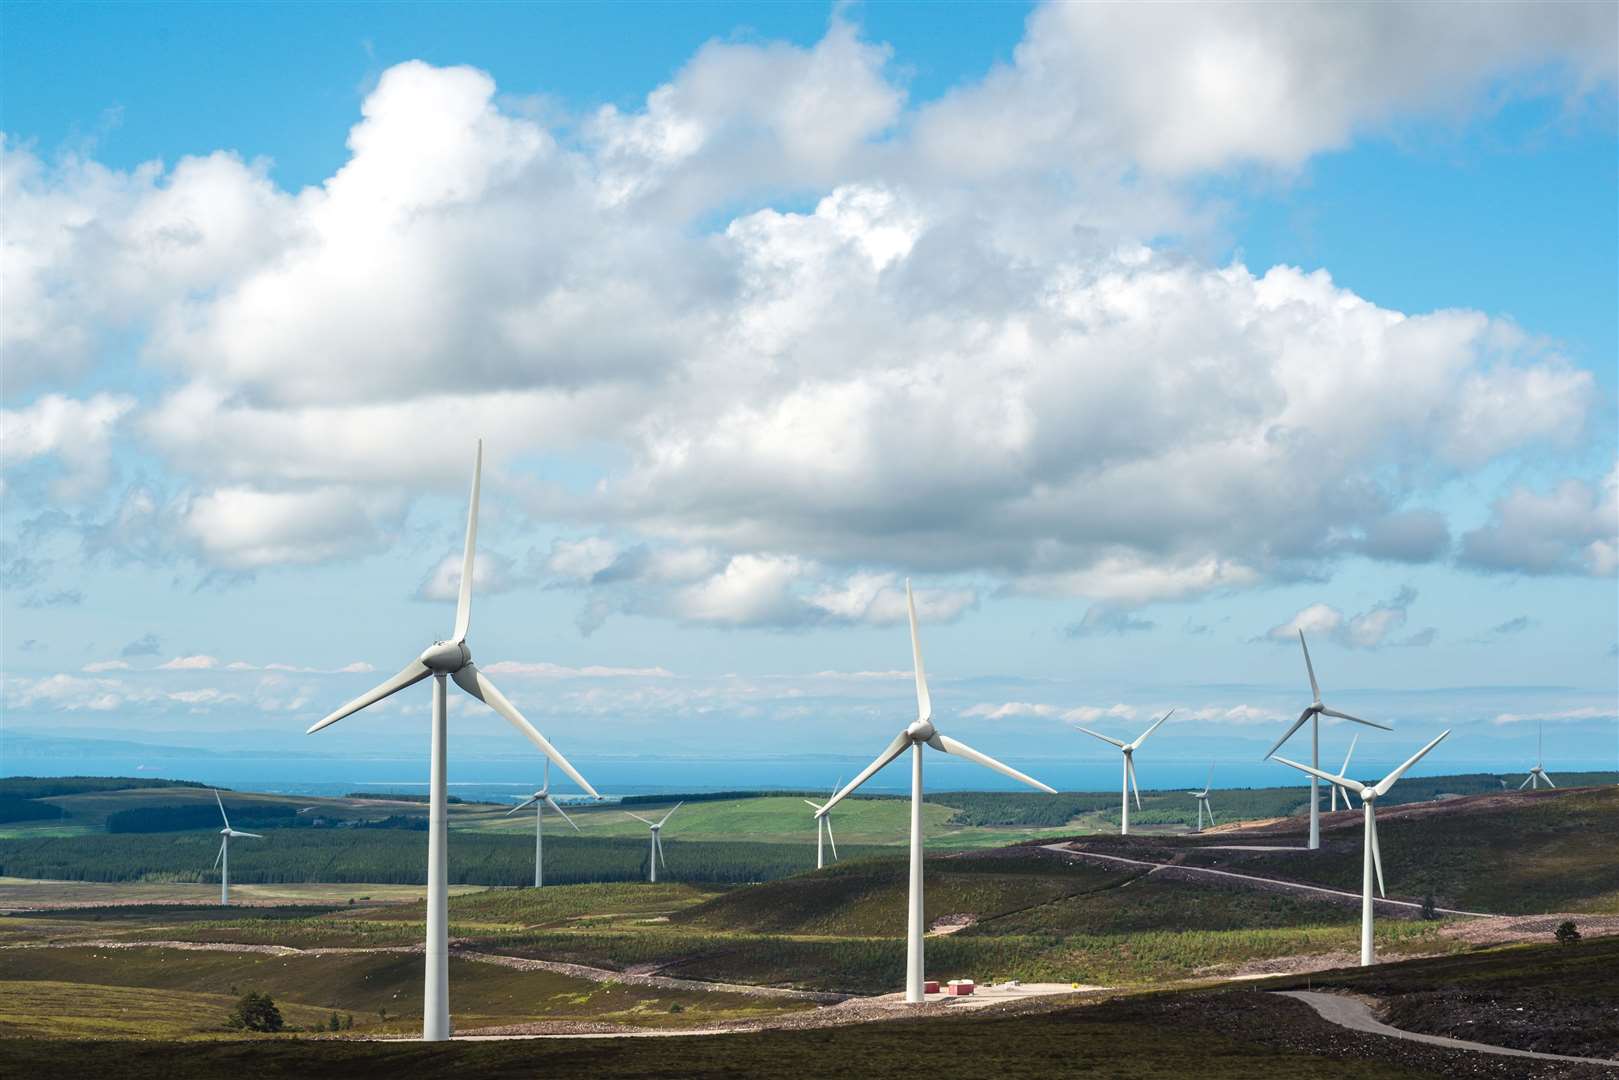 Berry Burn Wind Farm's turbines have also been generating funds for local projects.